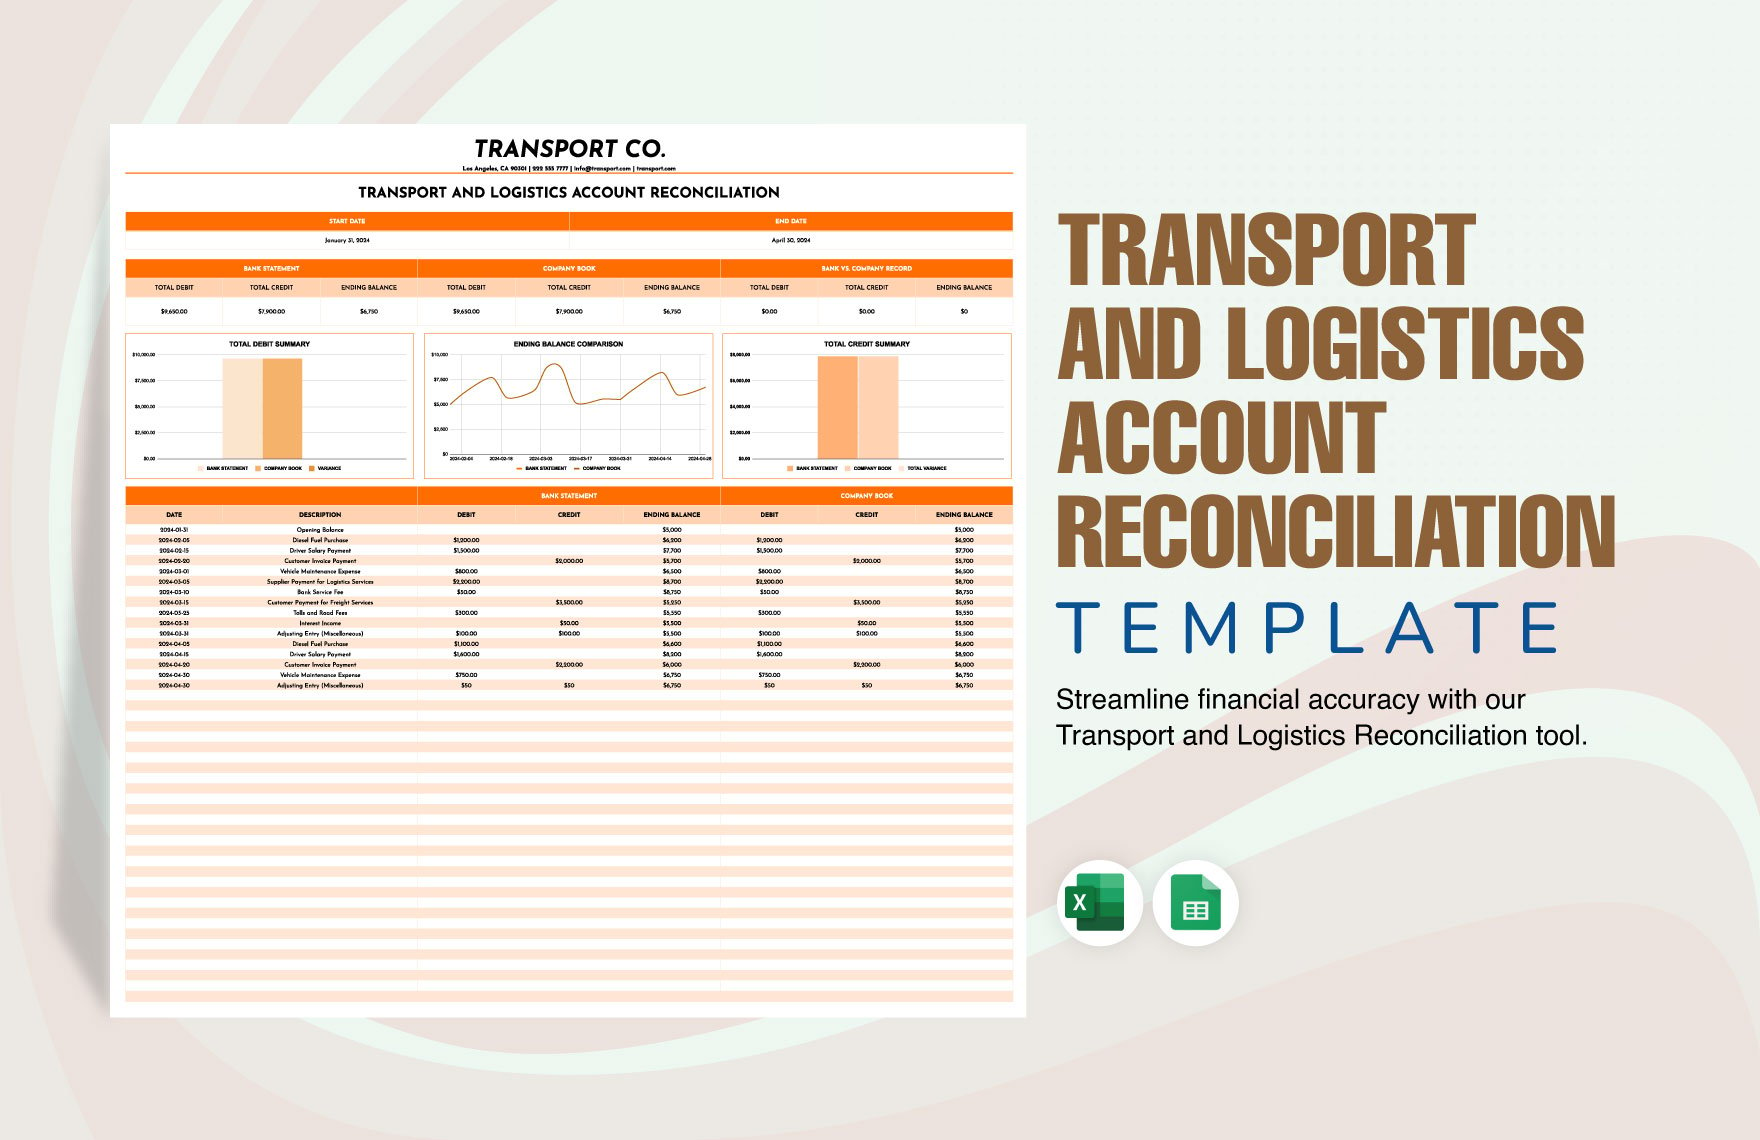 Free Transport and Logistics Account Reconciliation Template in Excel, Google Sheets